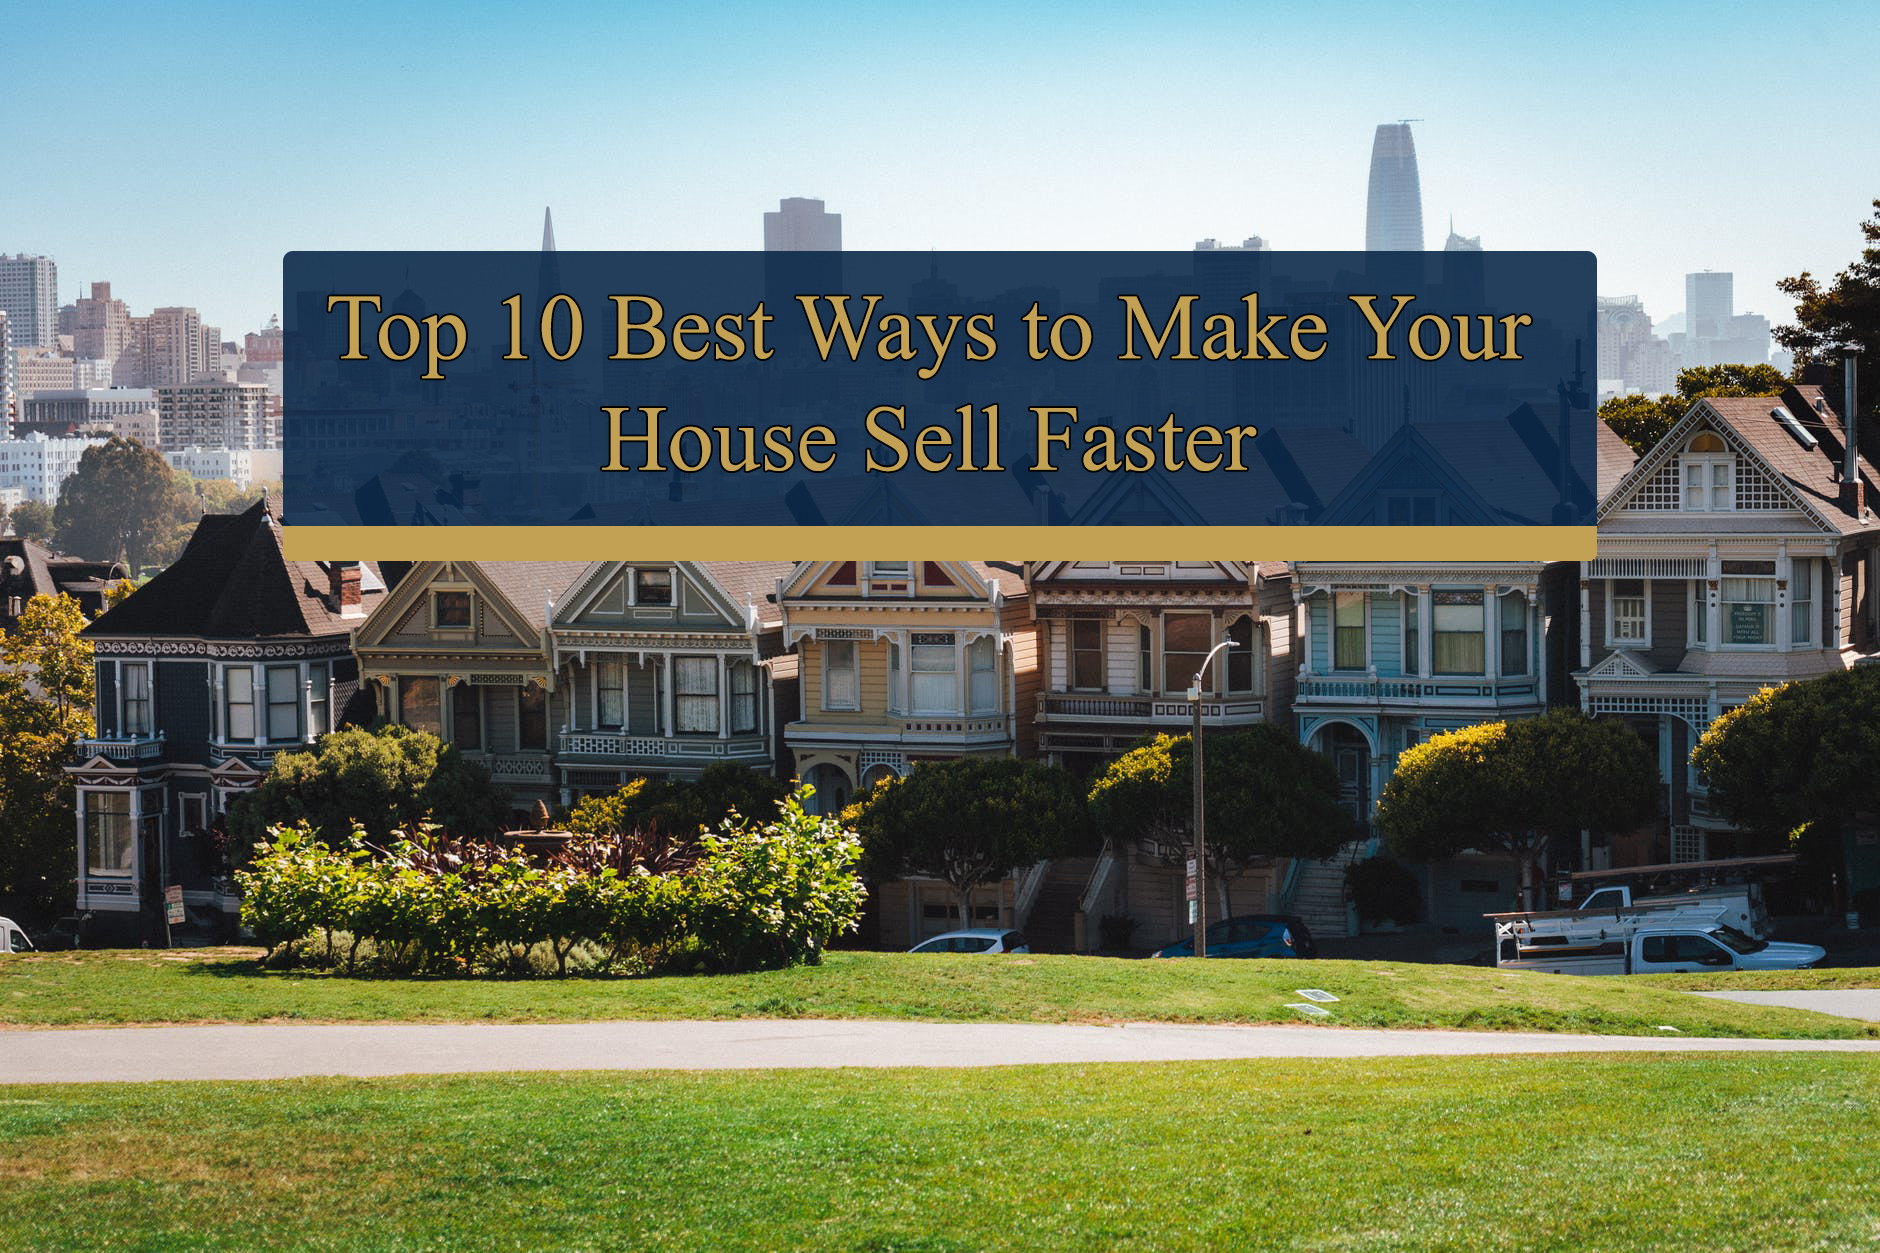 Top 10 ways to make your house sell faster